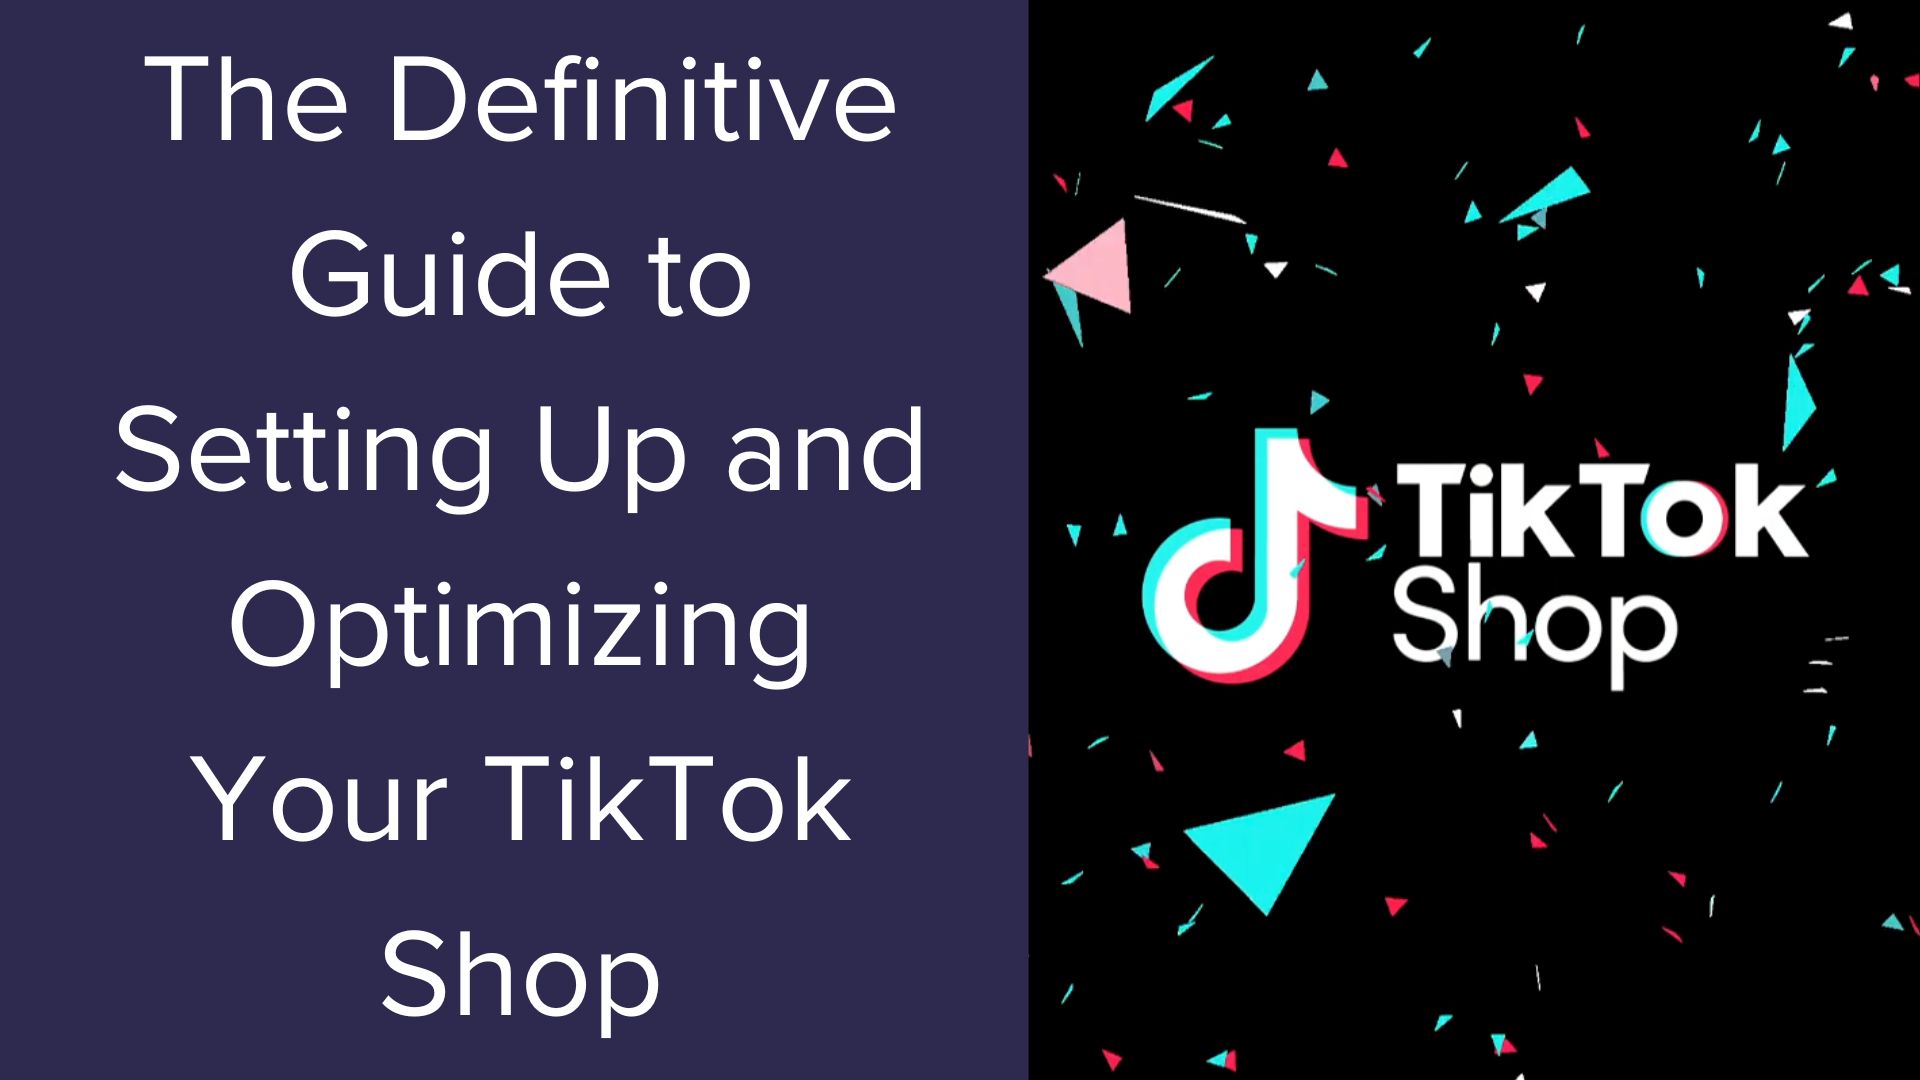 The Definitive Guide to Setting Up and Optimizing Your TikTok Shop